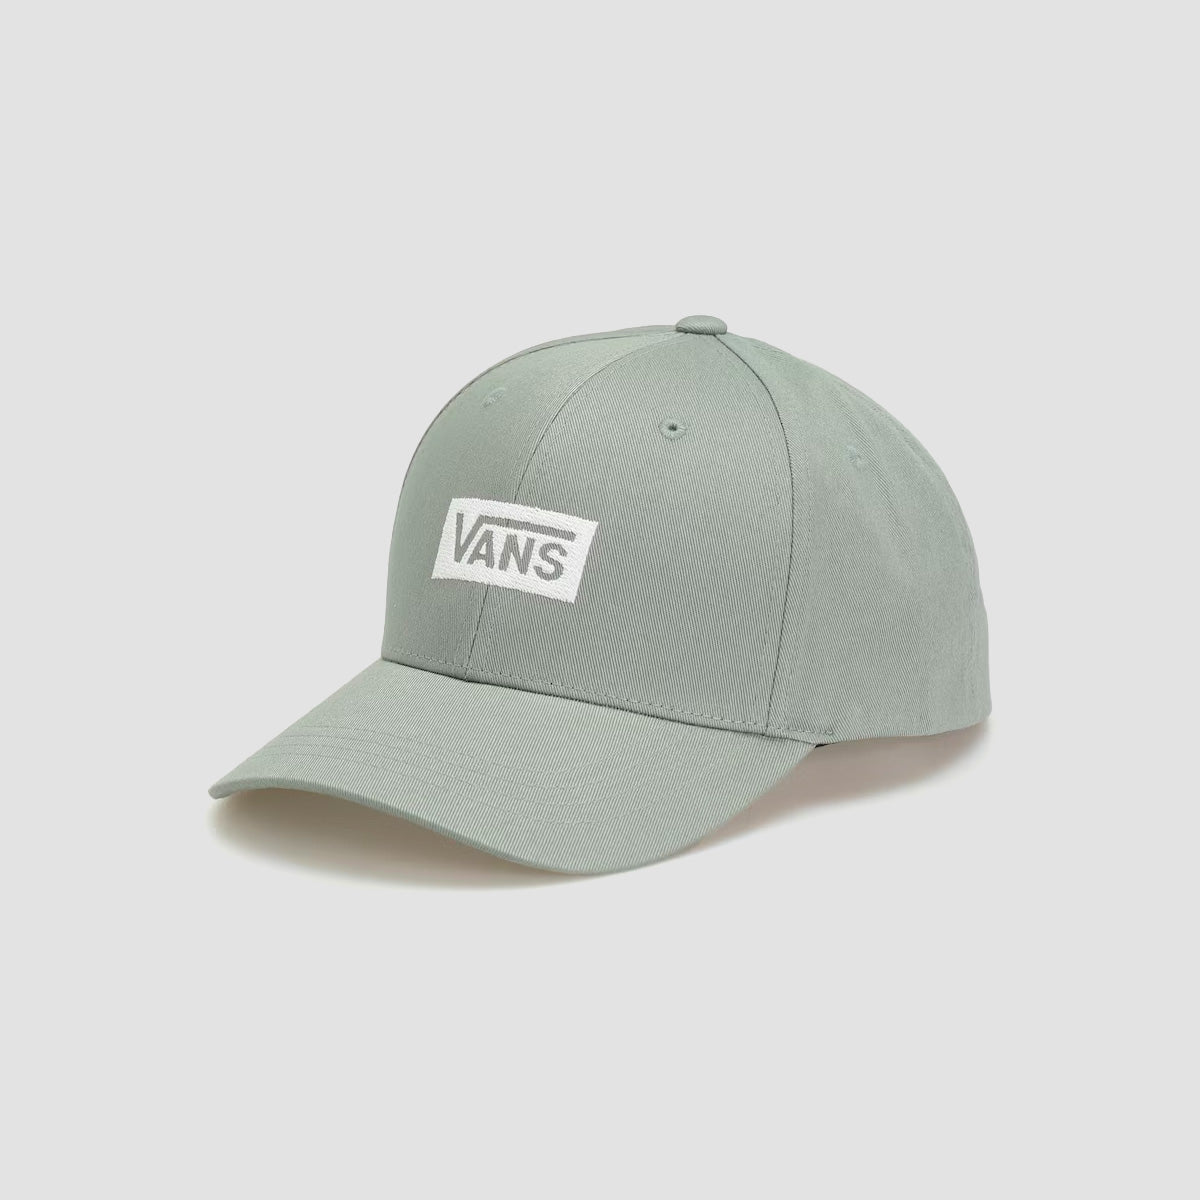 Vans Boxed Structured Jockey Cap Chinois Green